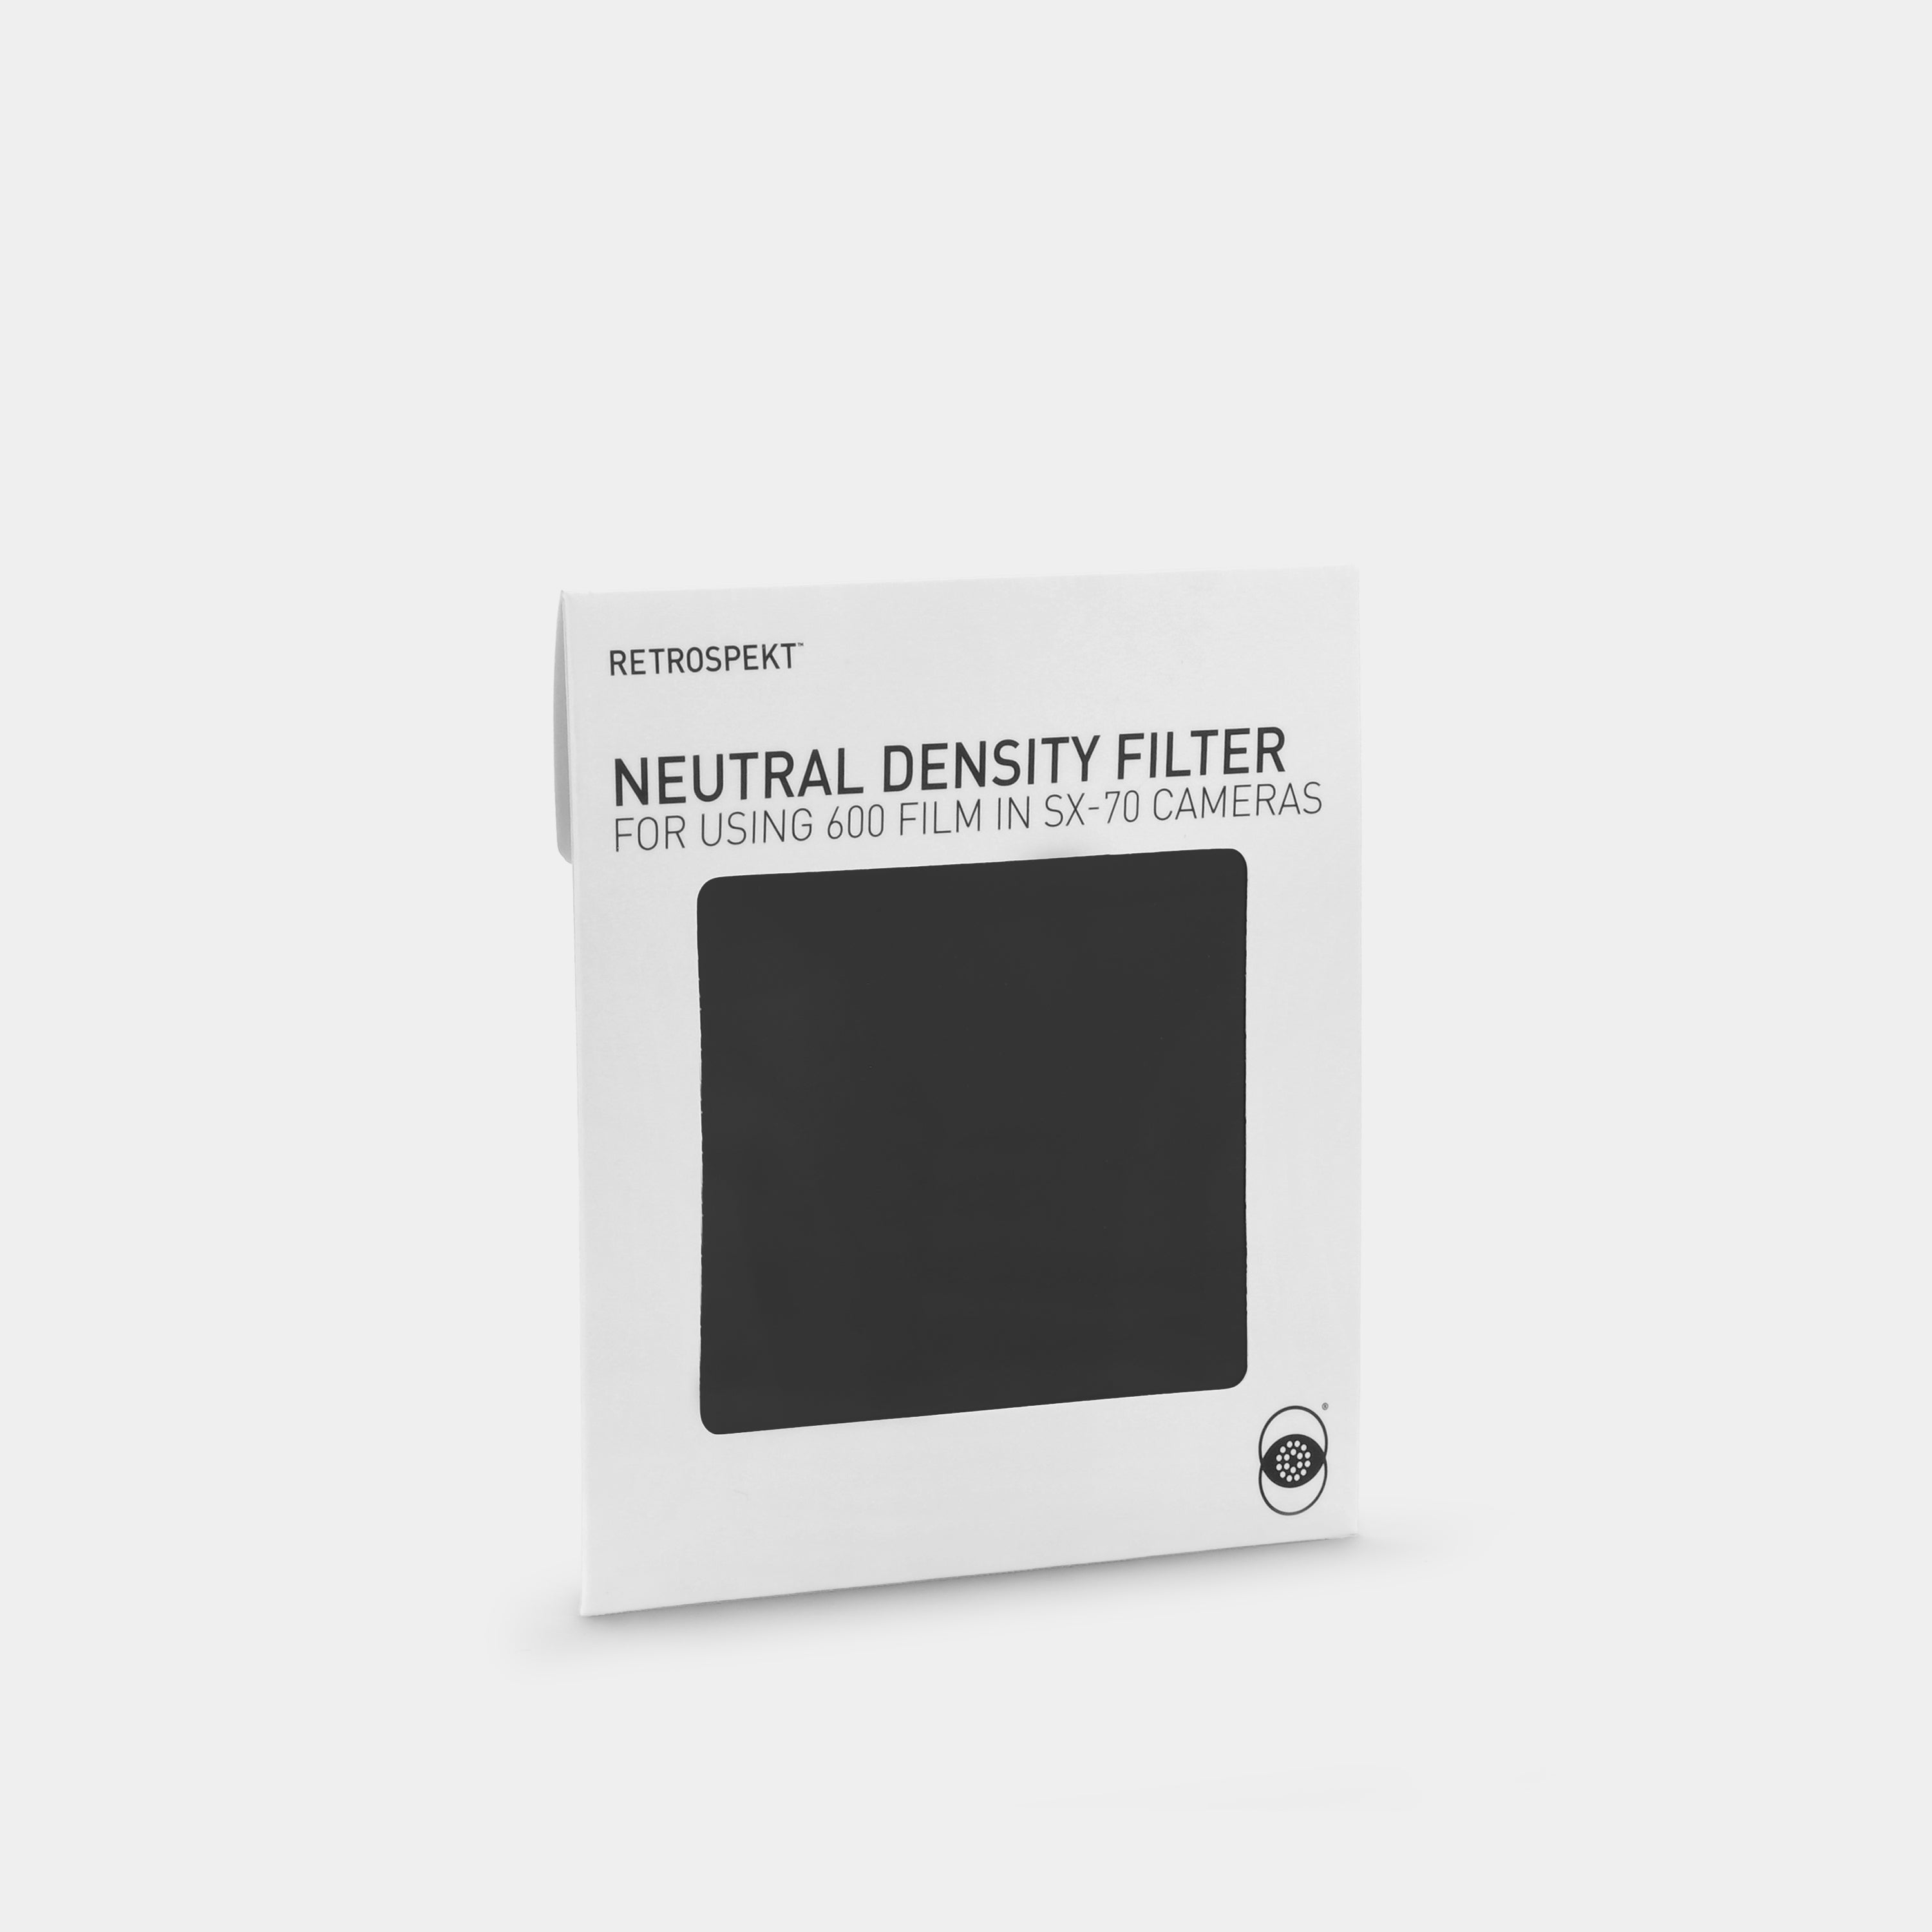 ND Filters for SX-70 Instant Film Cameras (2-Pack)